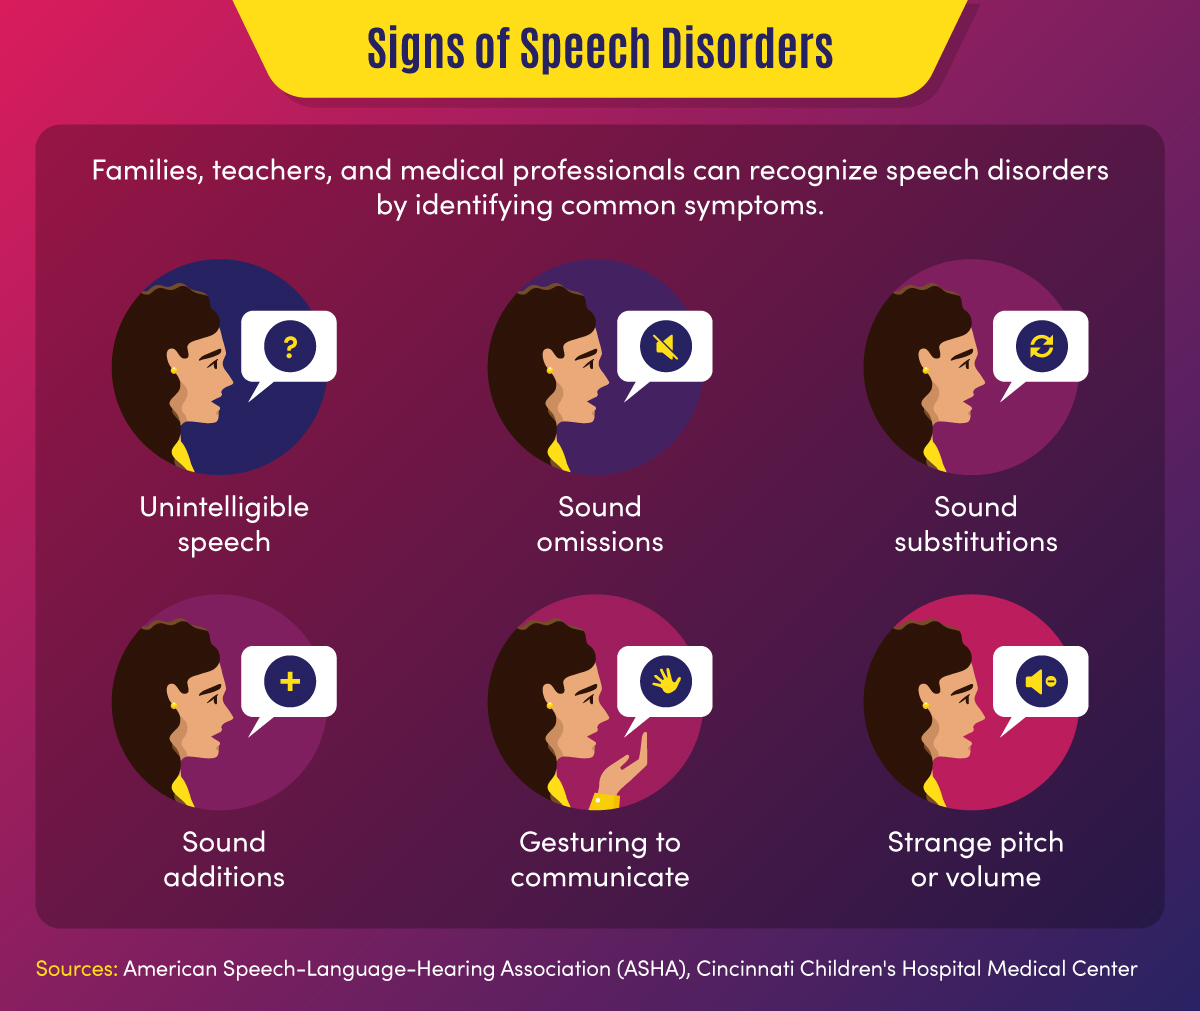 Signs of speech disorders include unintelligible speech and sound omissions, substitutions, and additions.